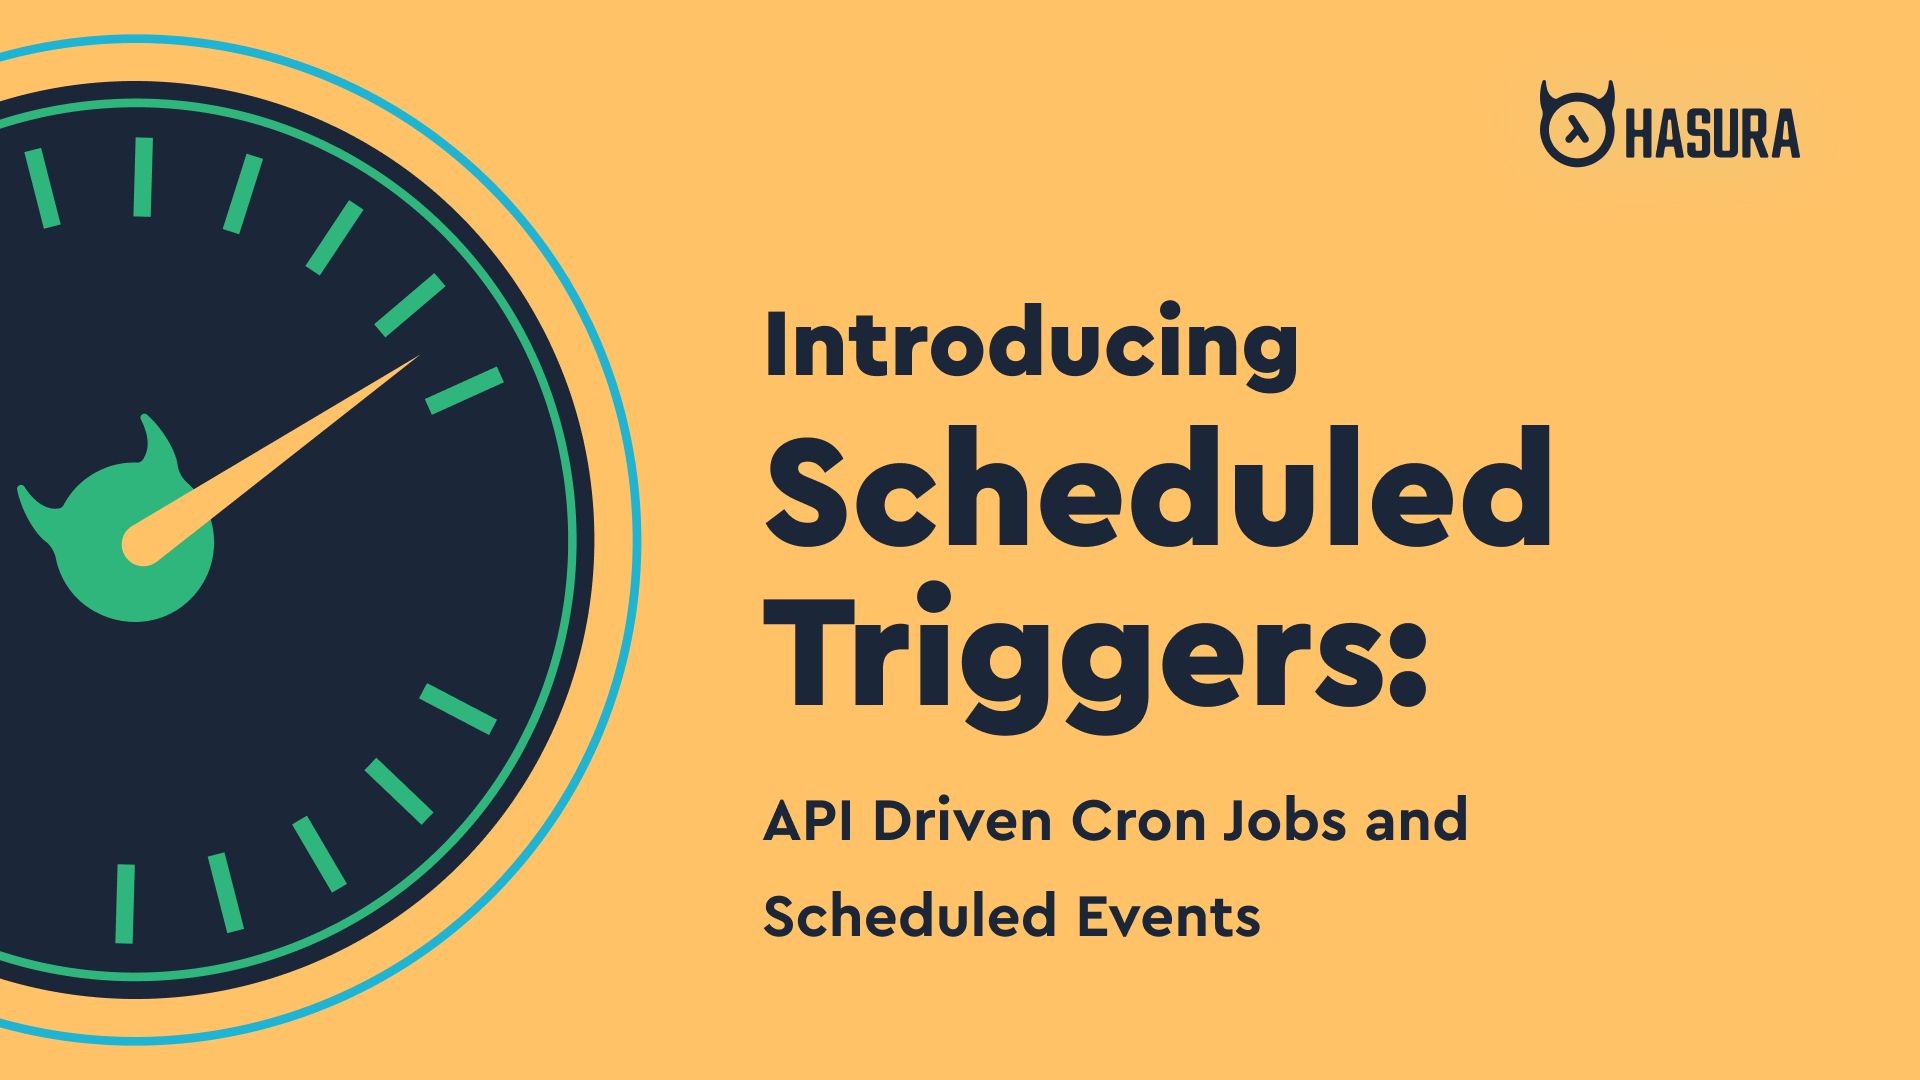 Introducing Scheduled Triggers: API Driven Cron Jobs and Scheduled Events